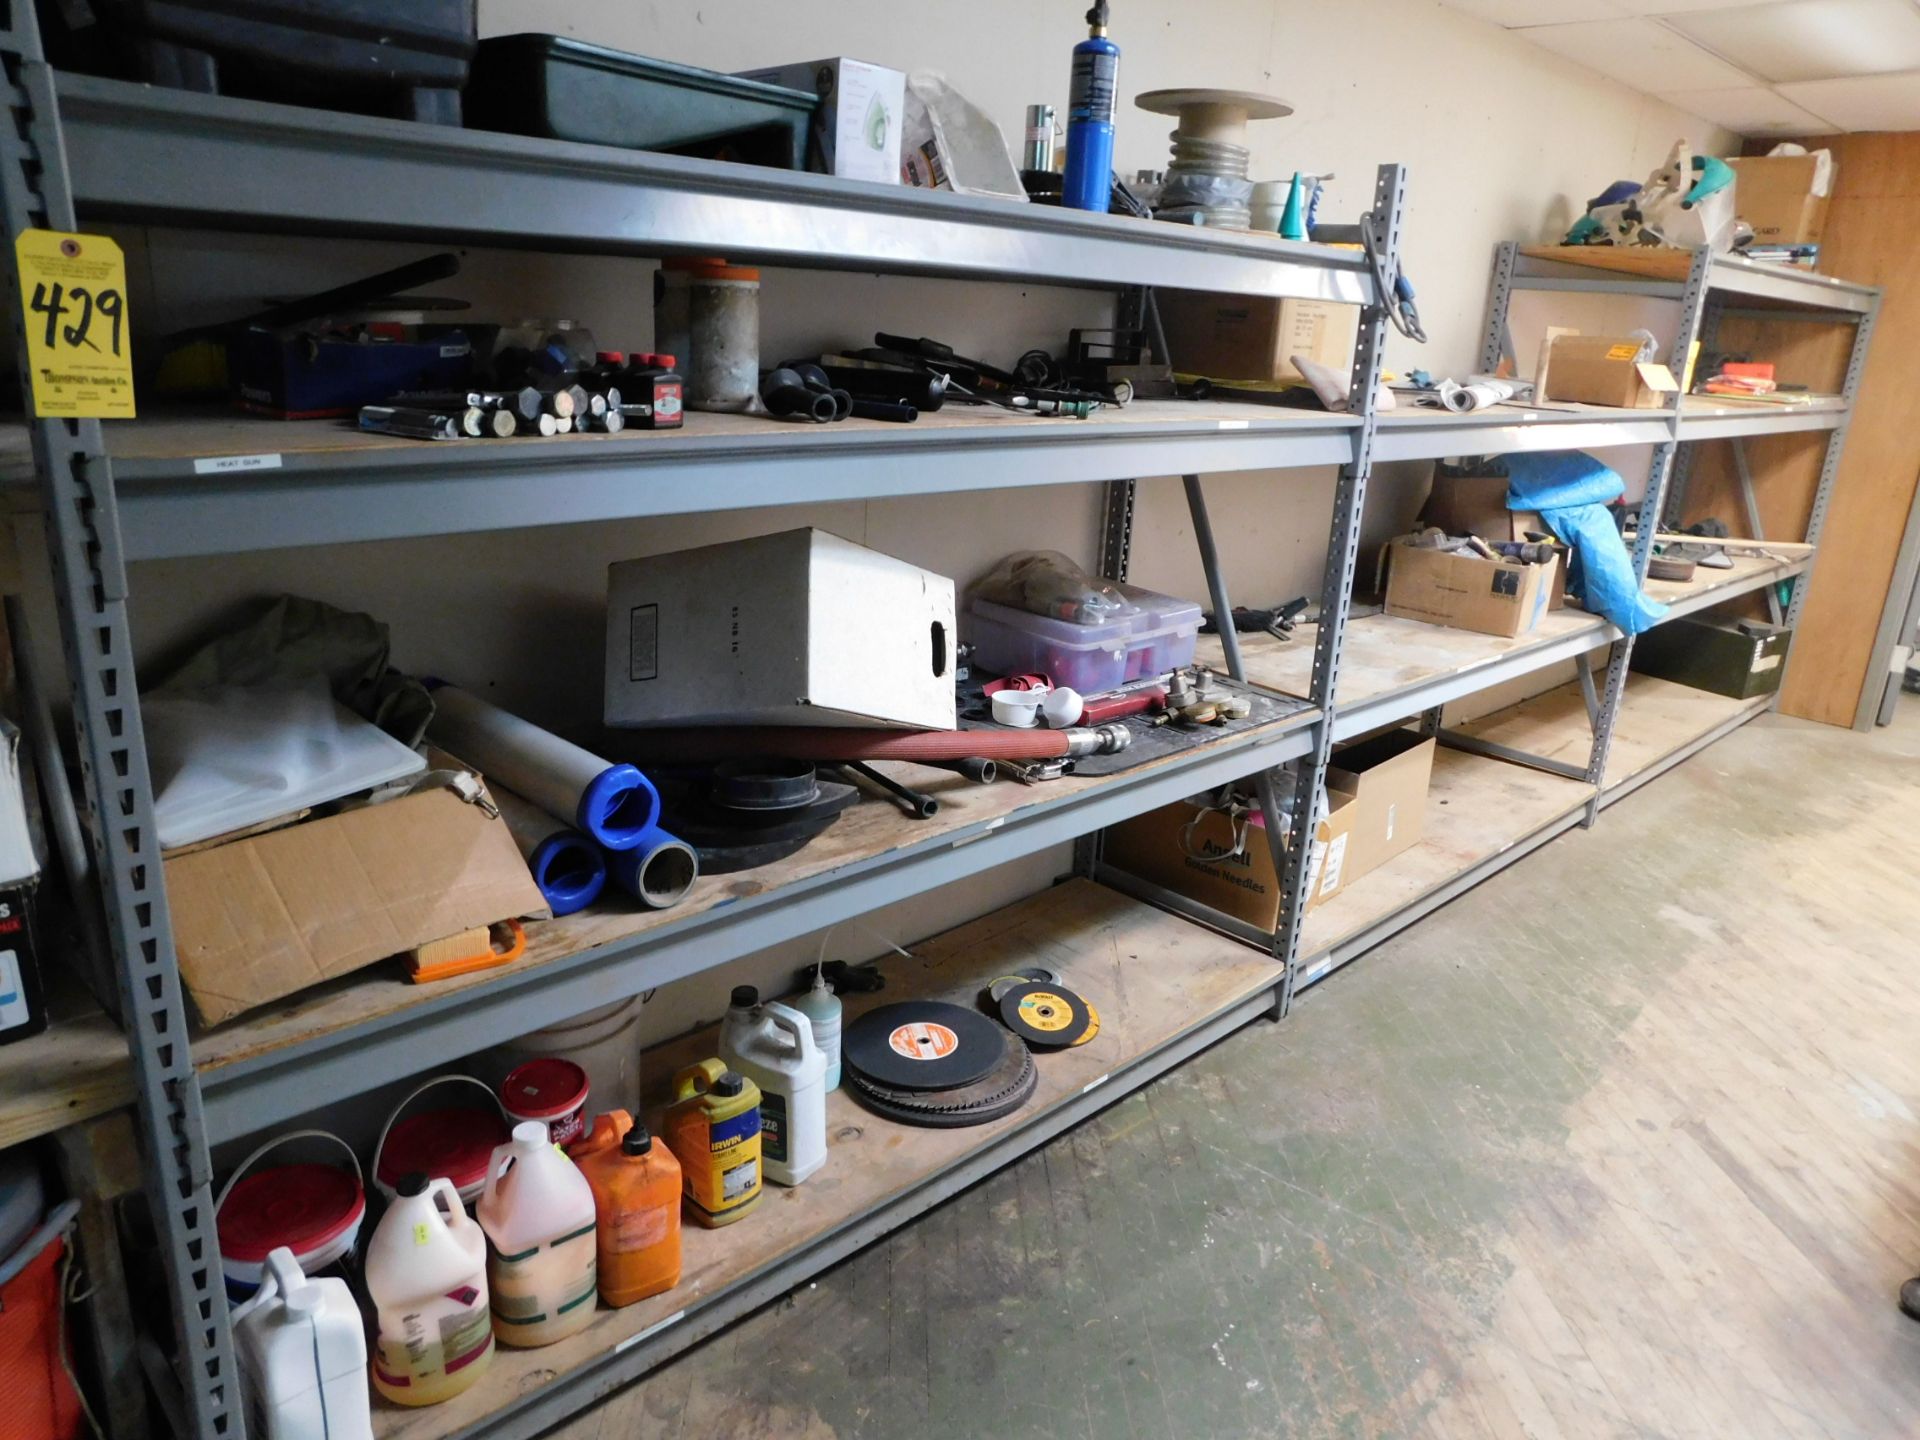 Contents of (3) Sections of Shelving